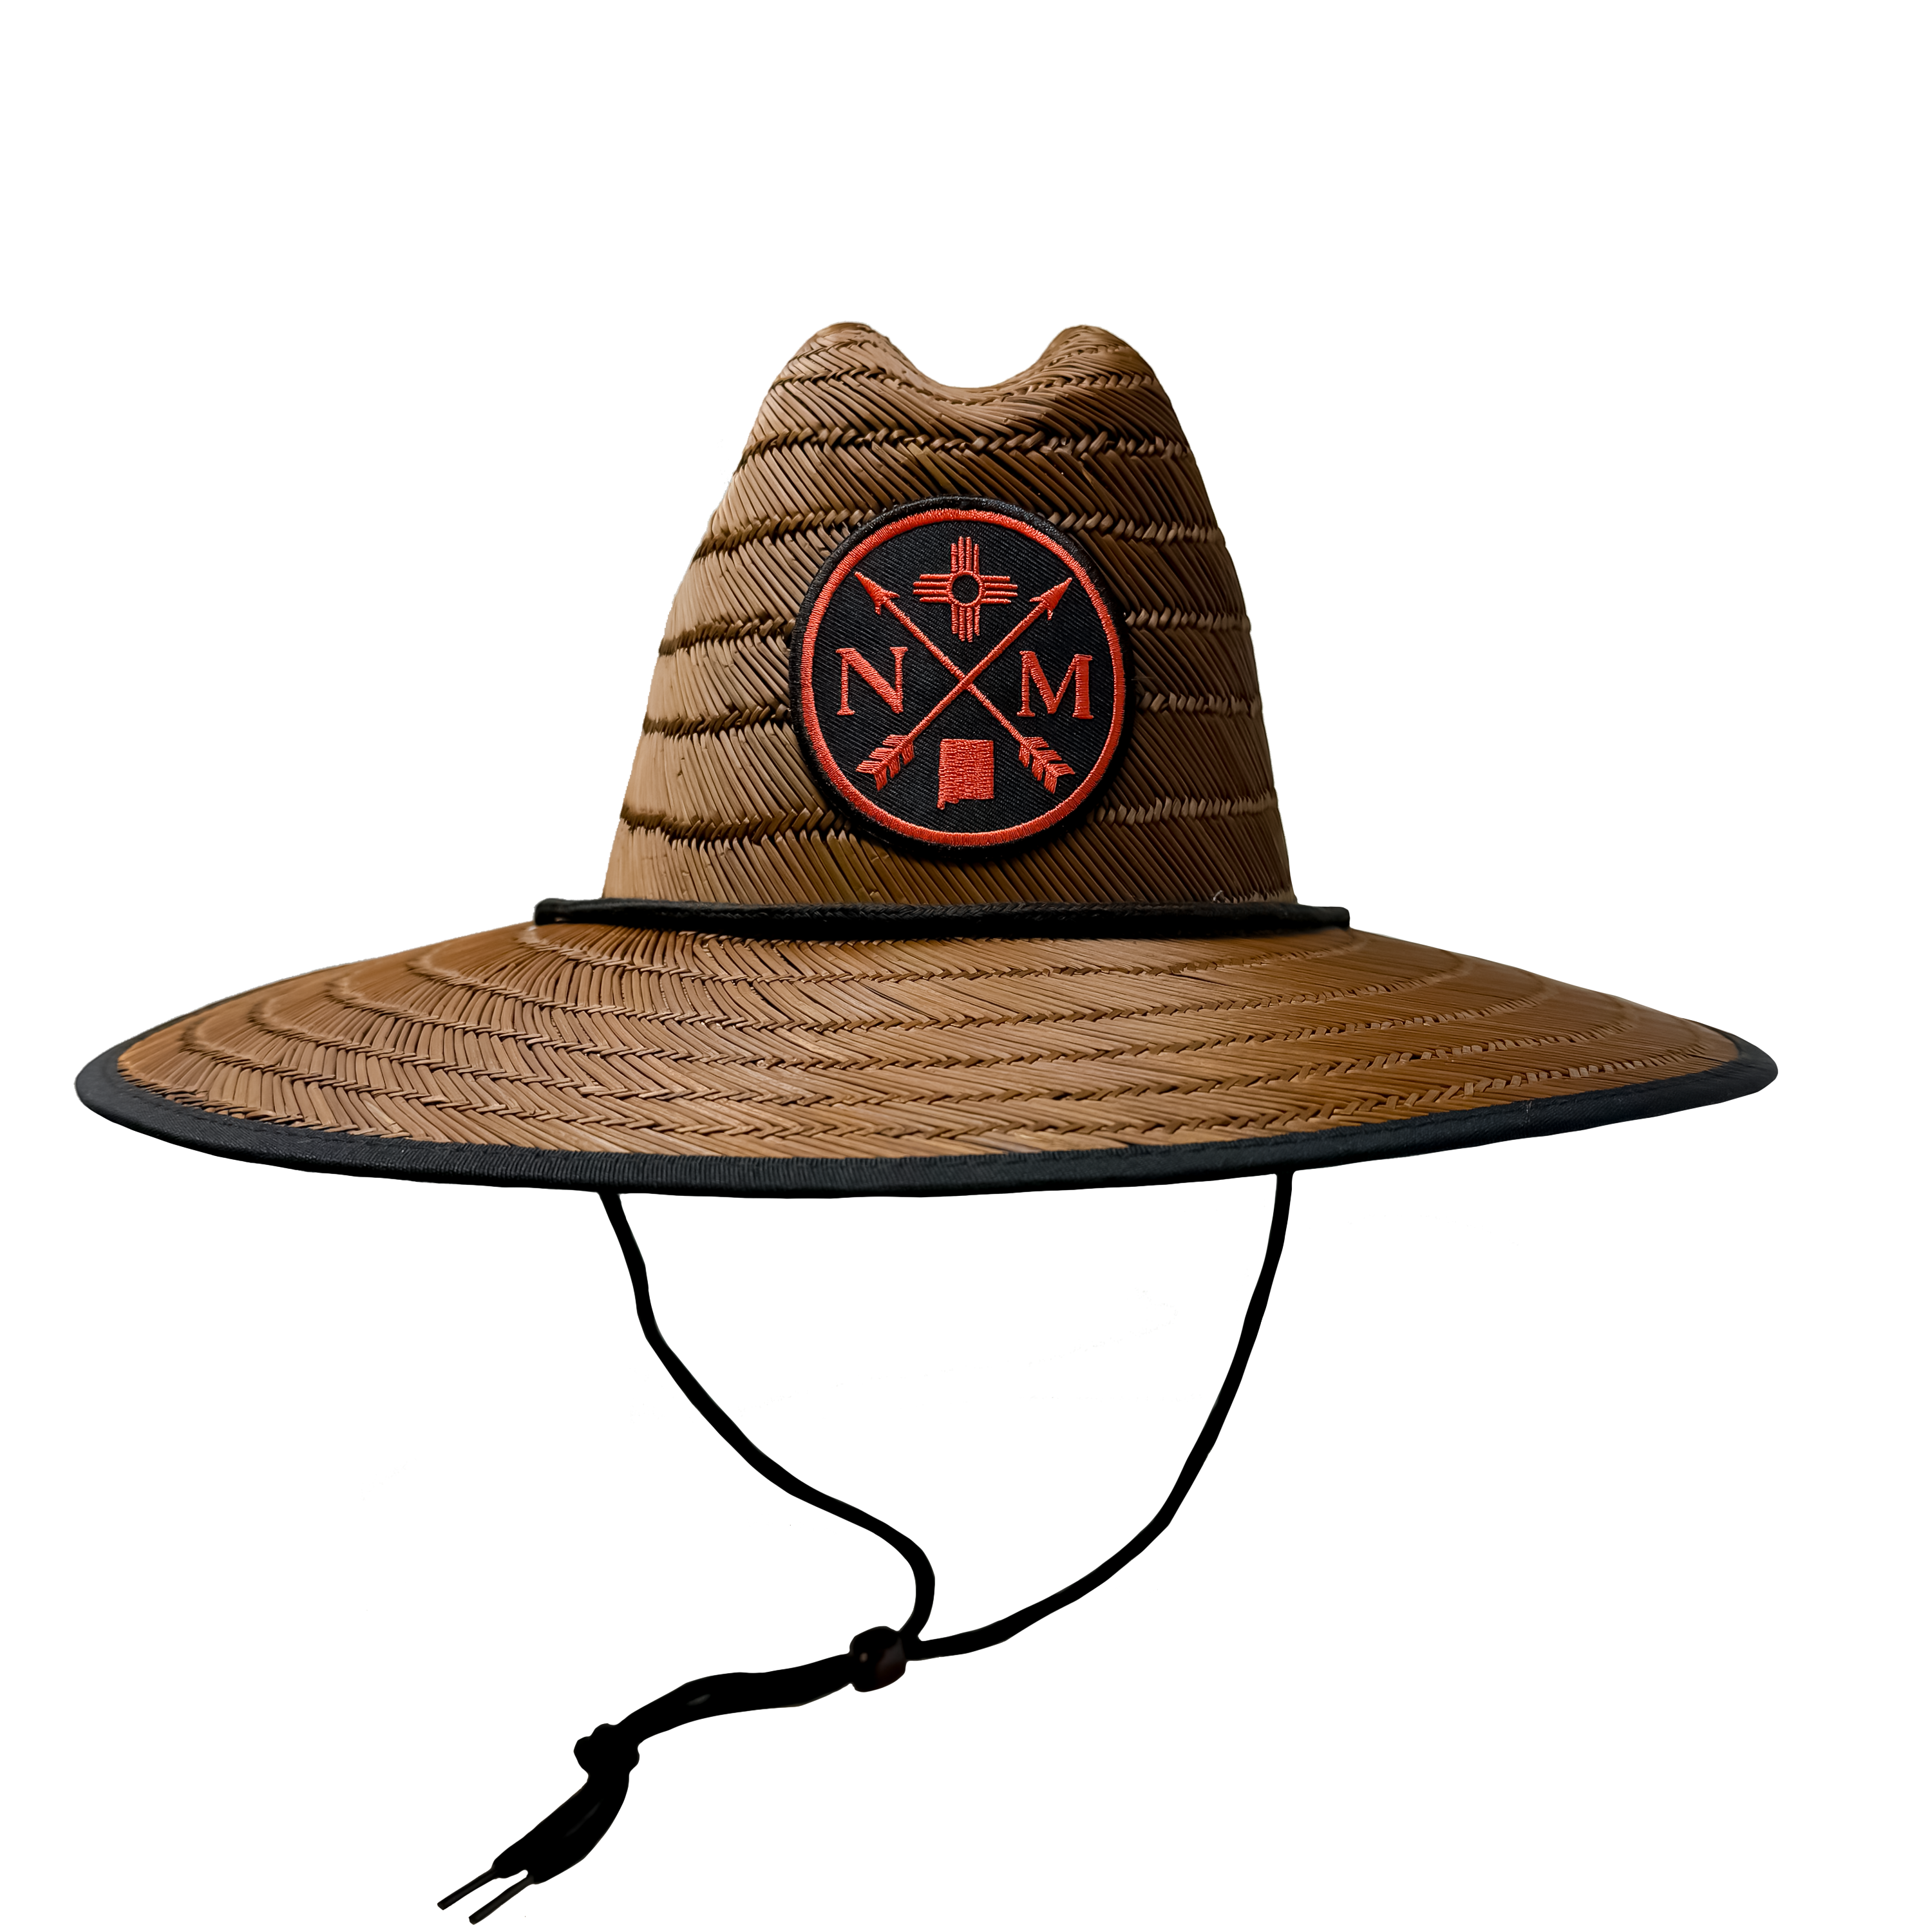 New Mexico Crossed Arrow Straw Hat- Red